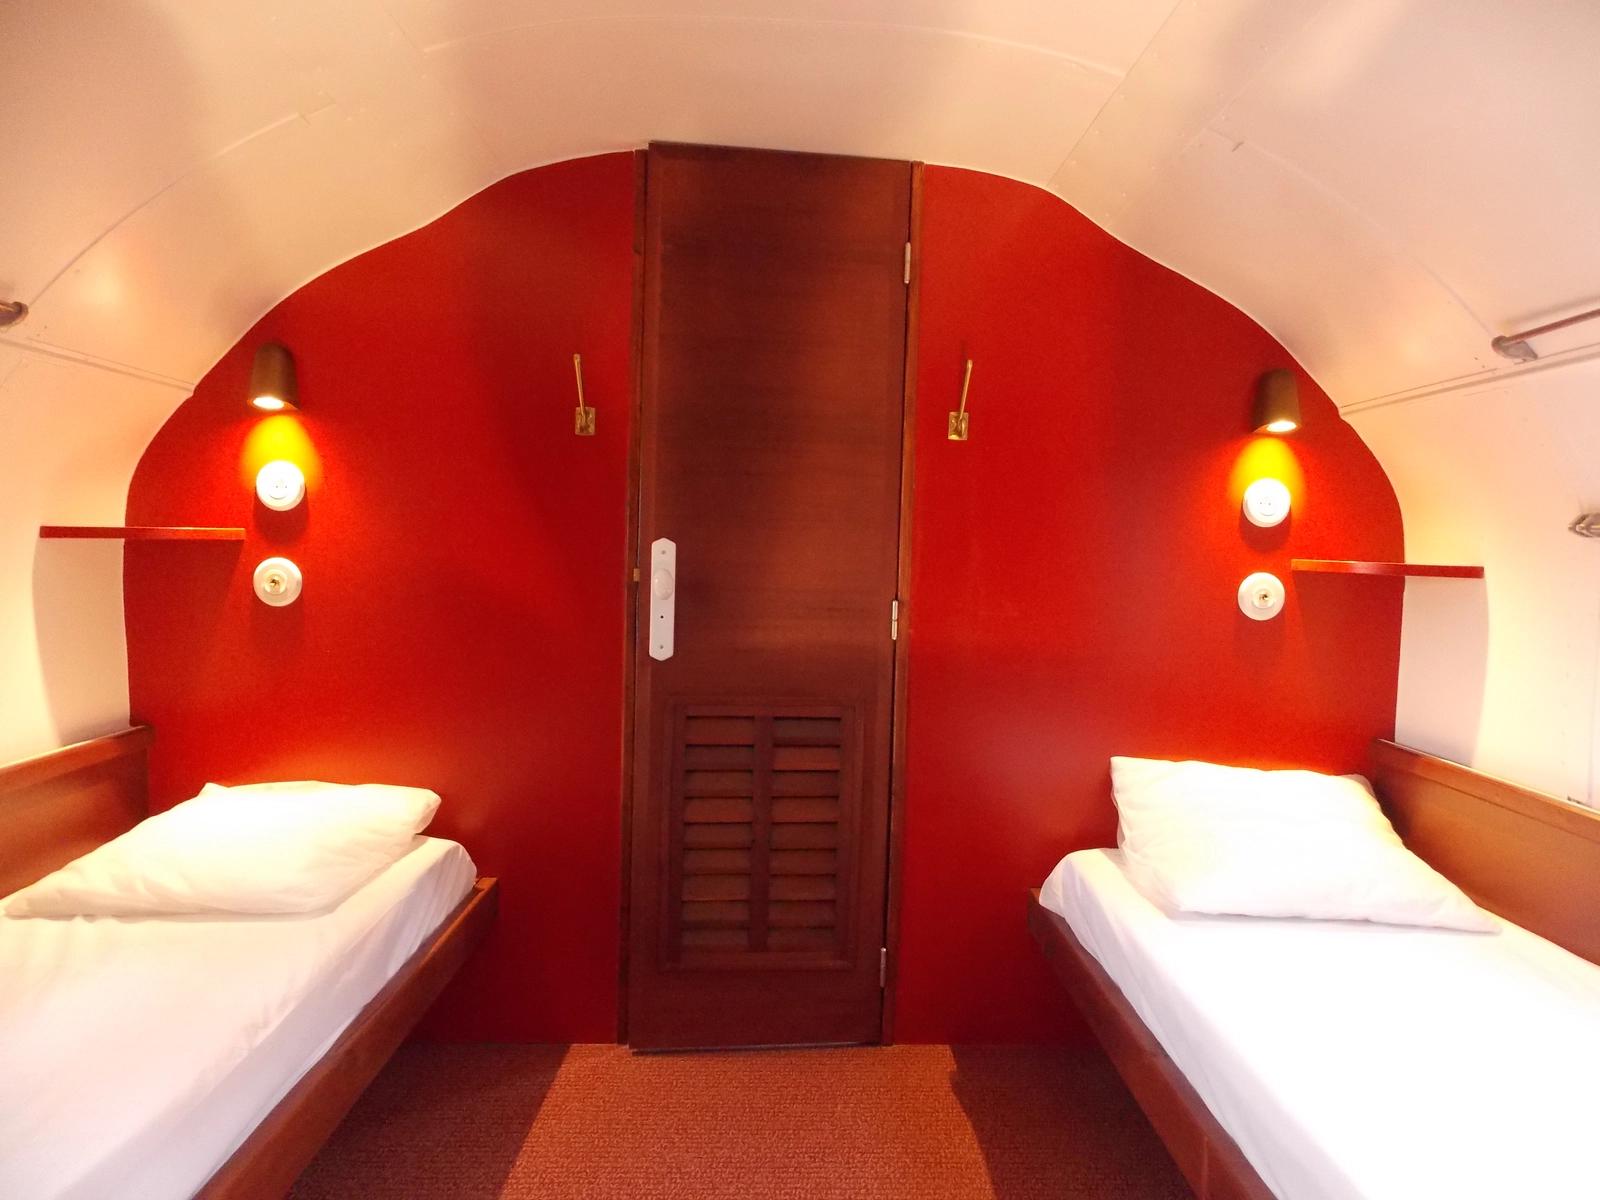 Space Train carriage transformed into an unusual dwelling - 1